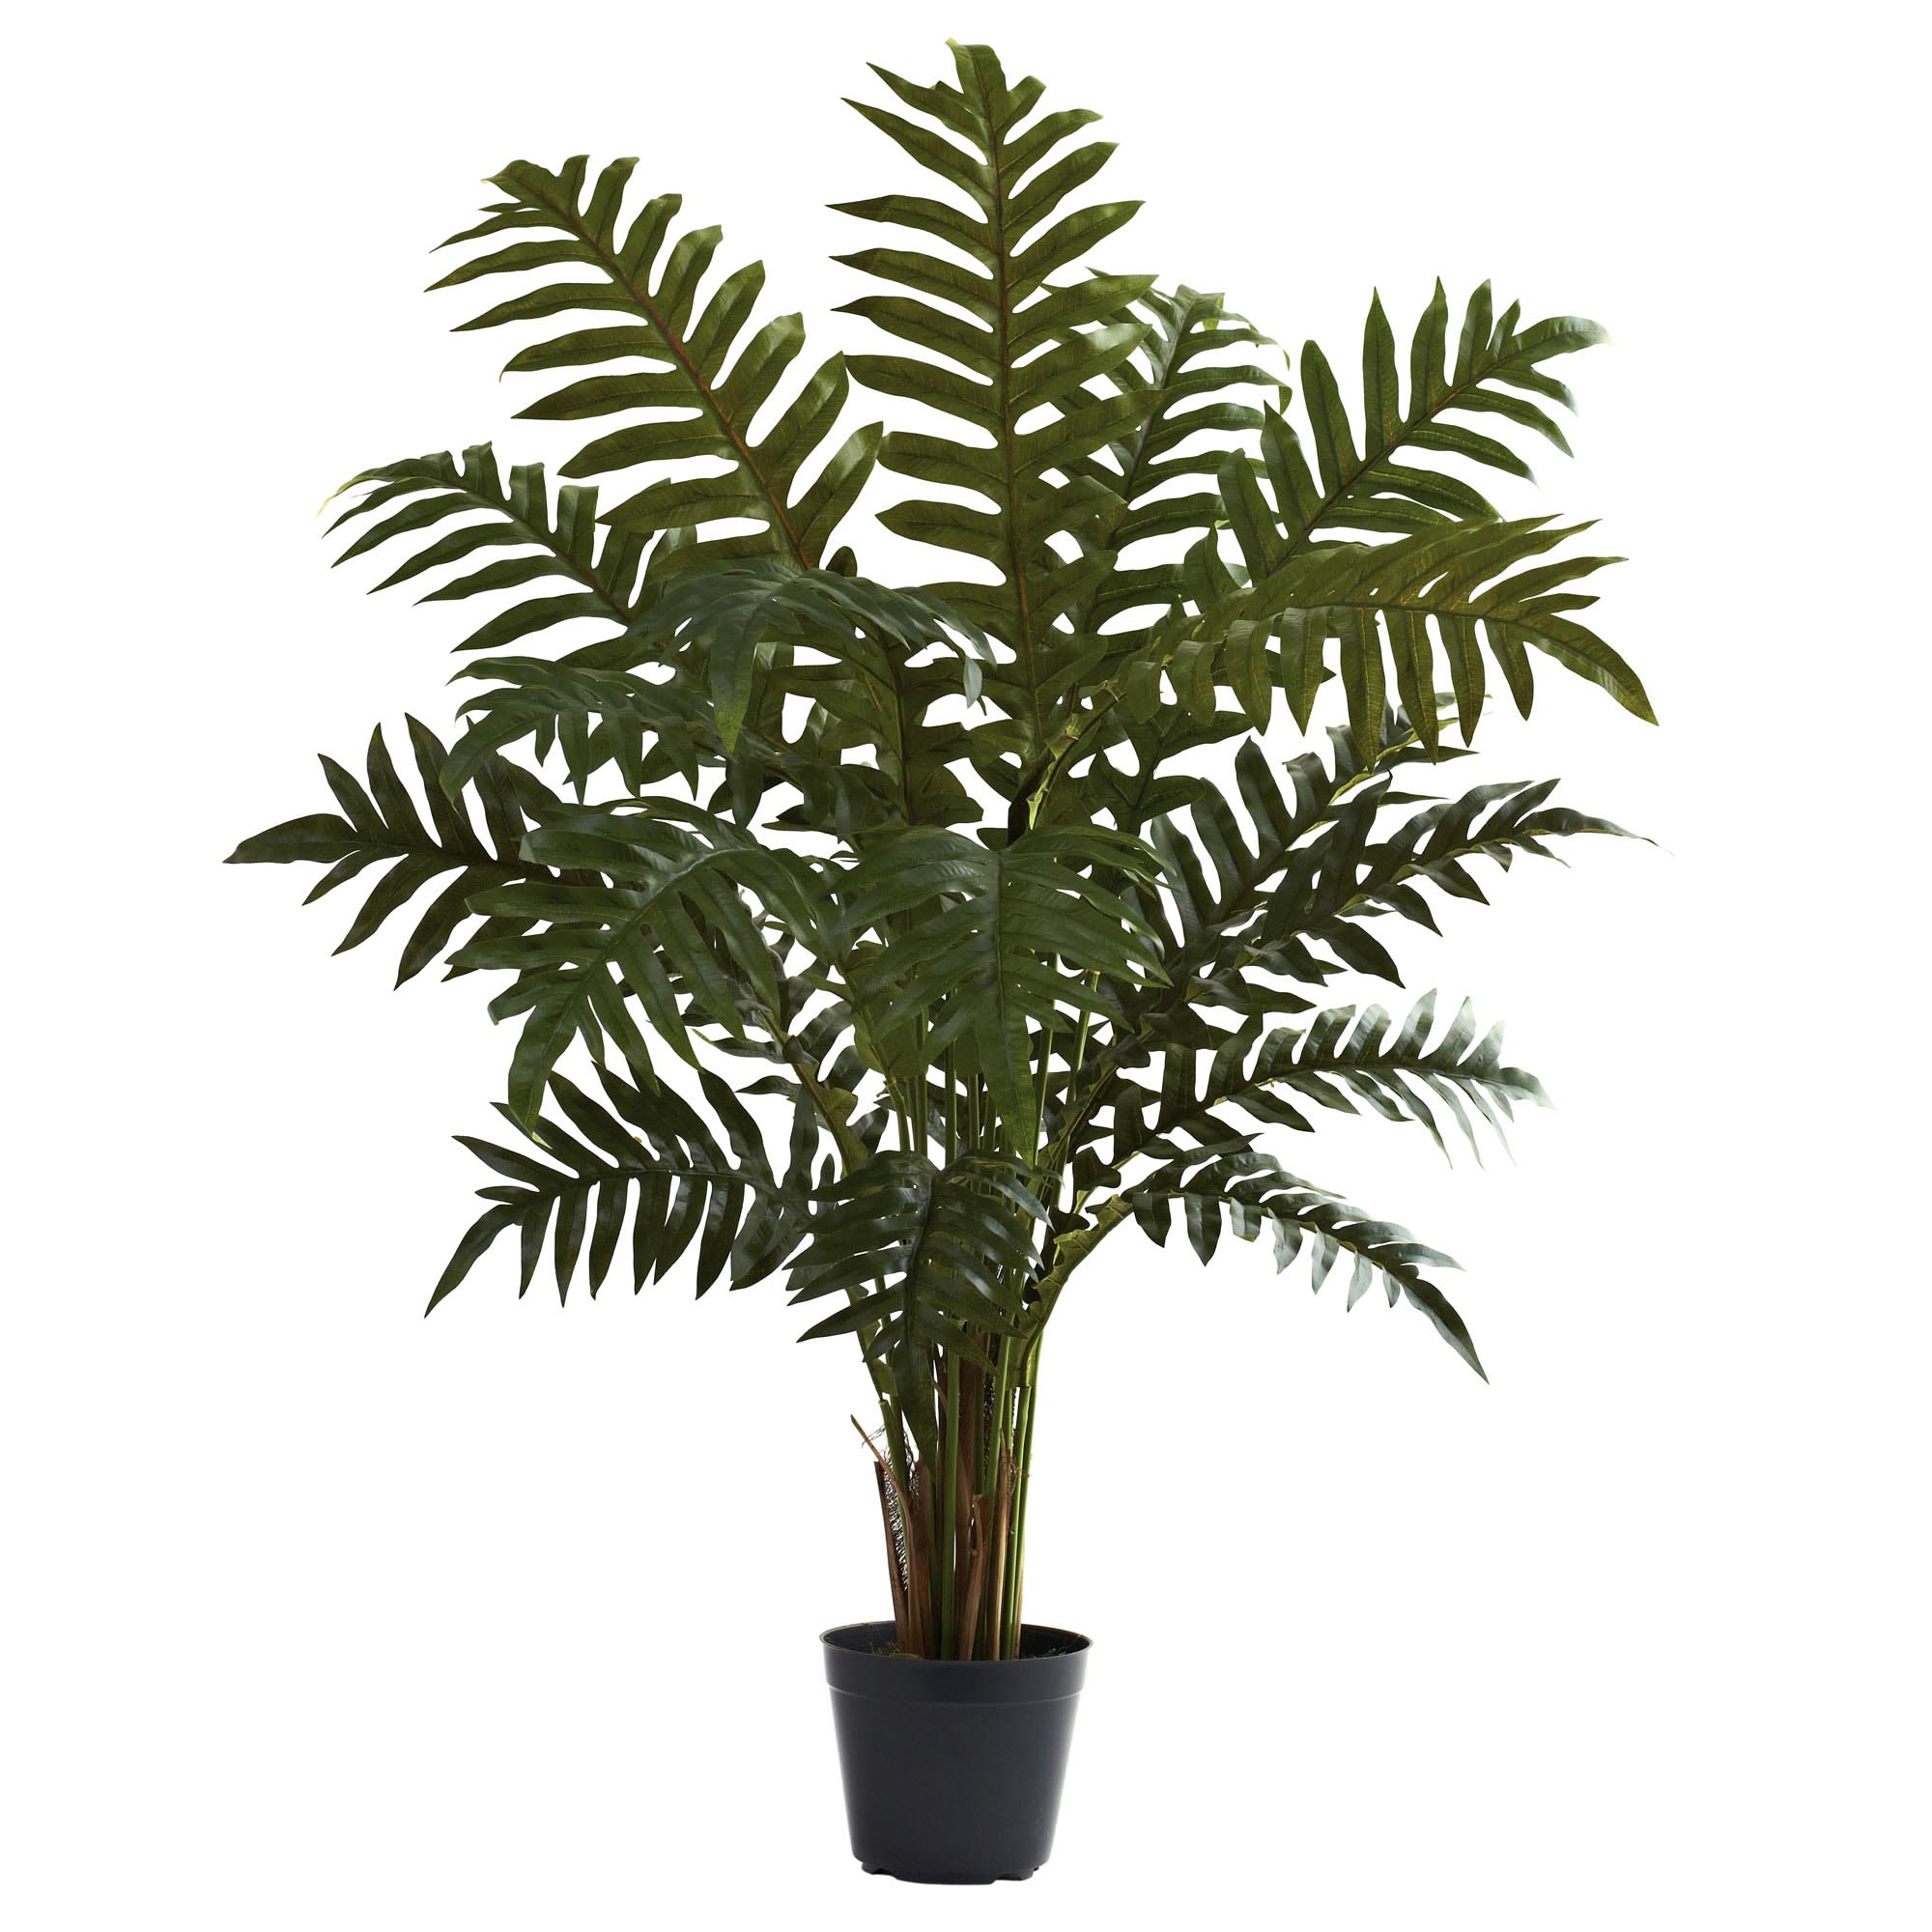 3.5 Foot Artificial Evergreen Plant: Potted